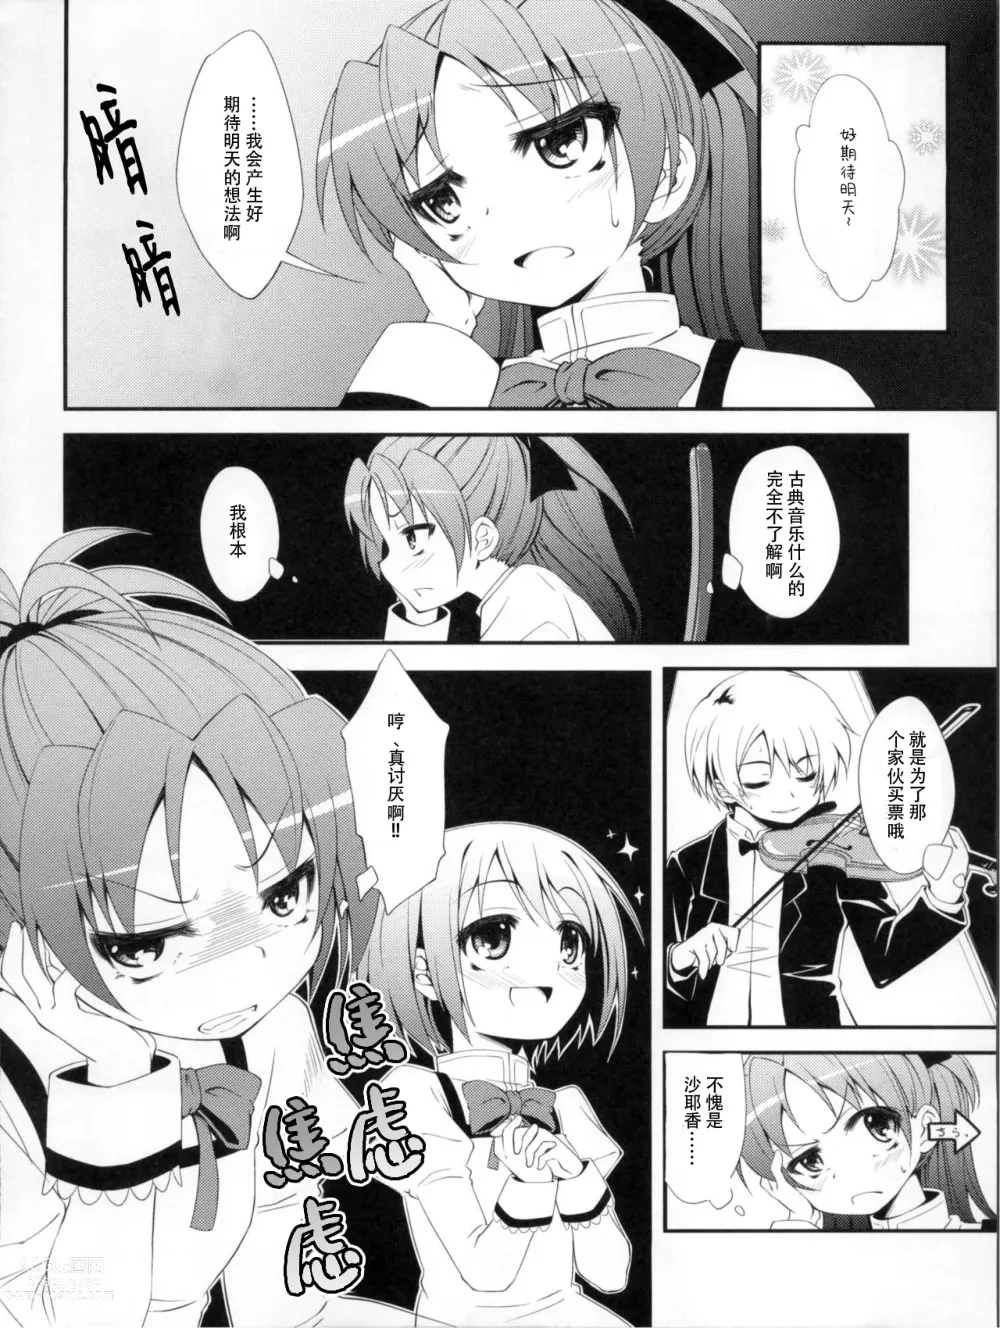 Page 5 of doujinshi Lovely Girls Lily vol. 2